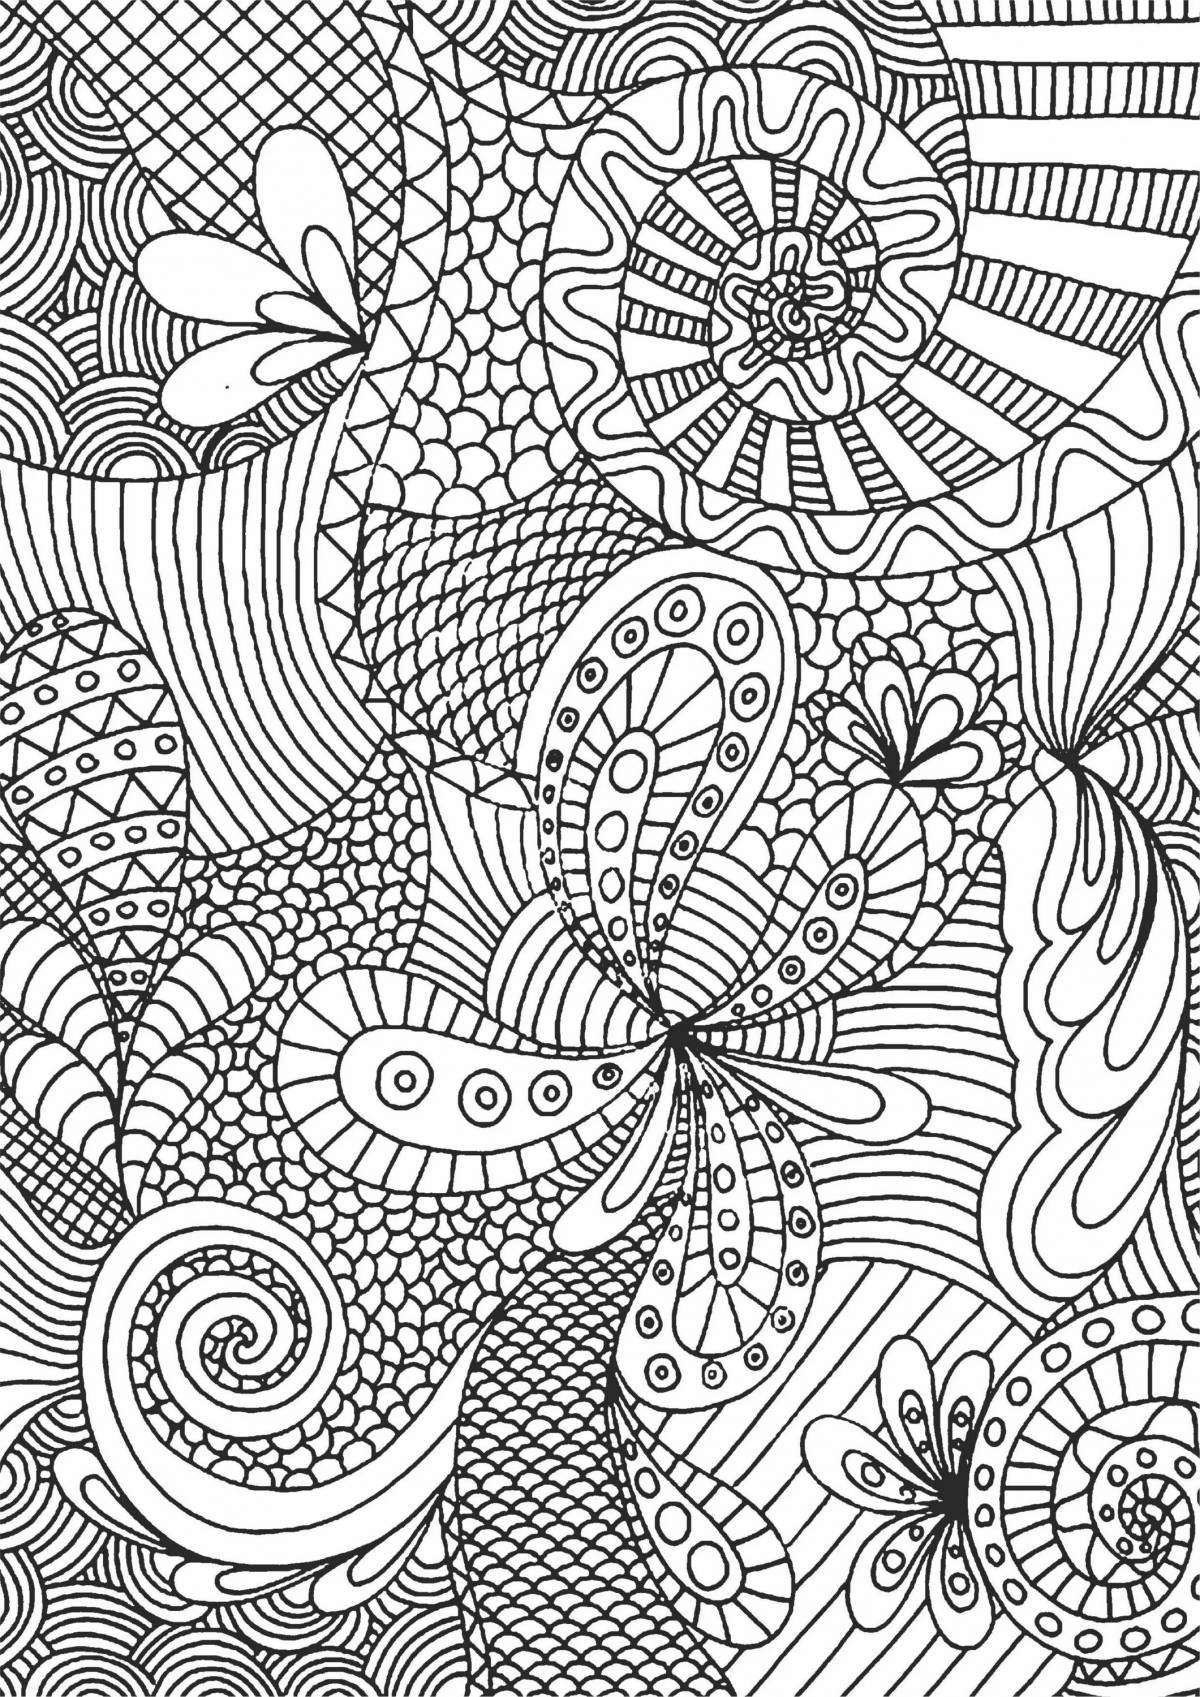 Peaceful coloring relax antistress for adults